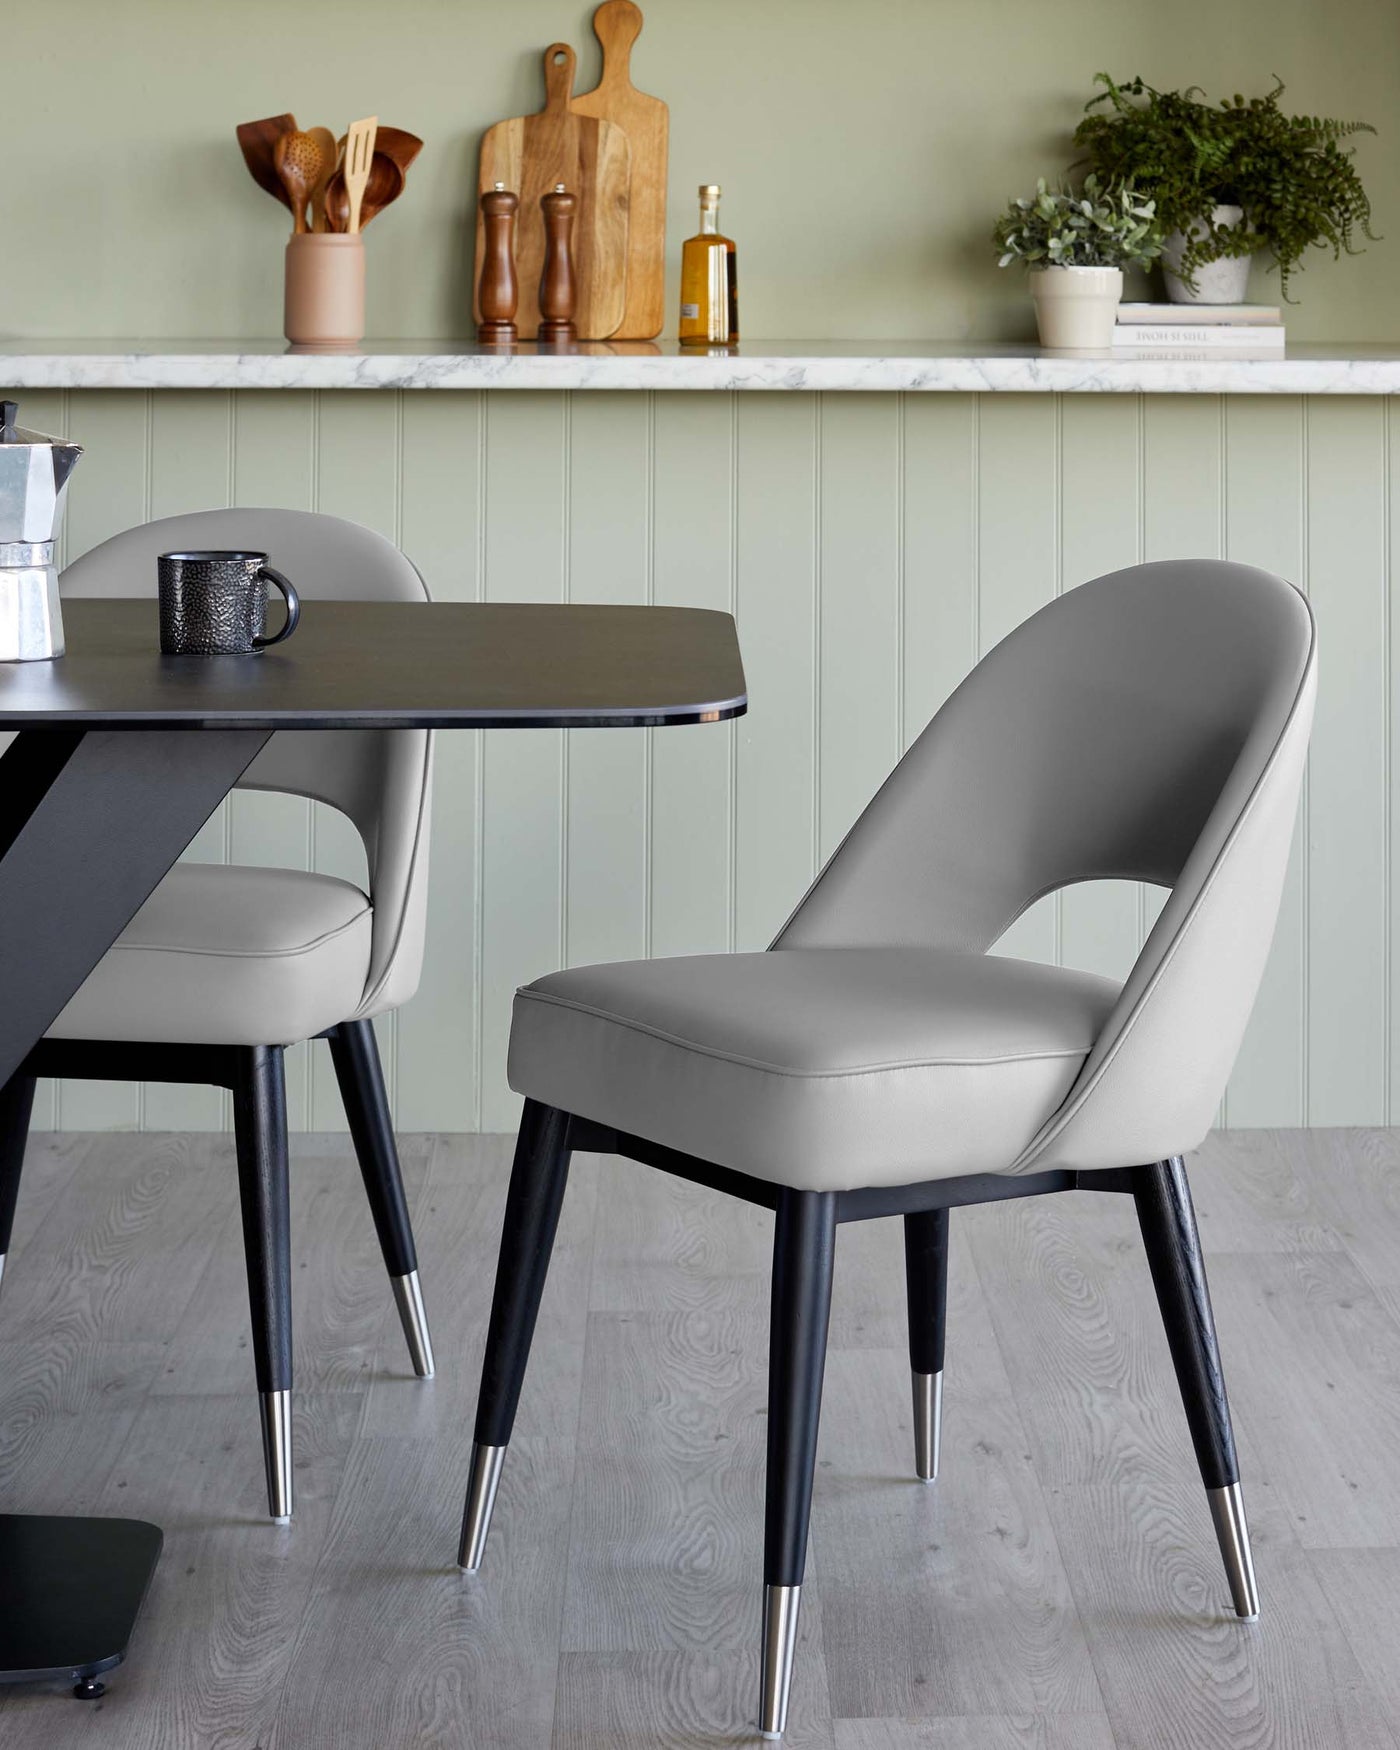 Modern dining set featuring a sleek black rectangular table with metal legs and a complementary elegant grey upholstered dining chair with black and metal accents. The scene is styled in a contemporary dining space with neutral tones.